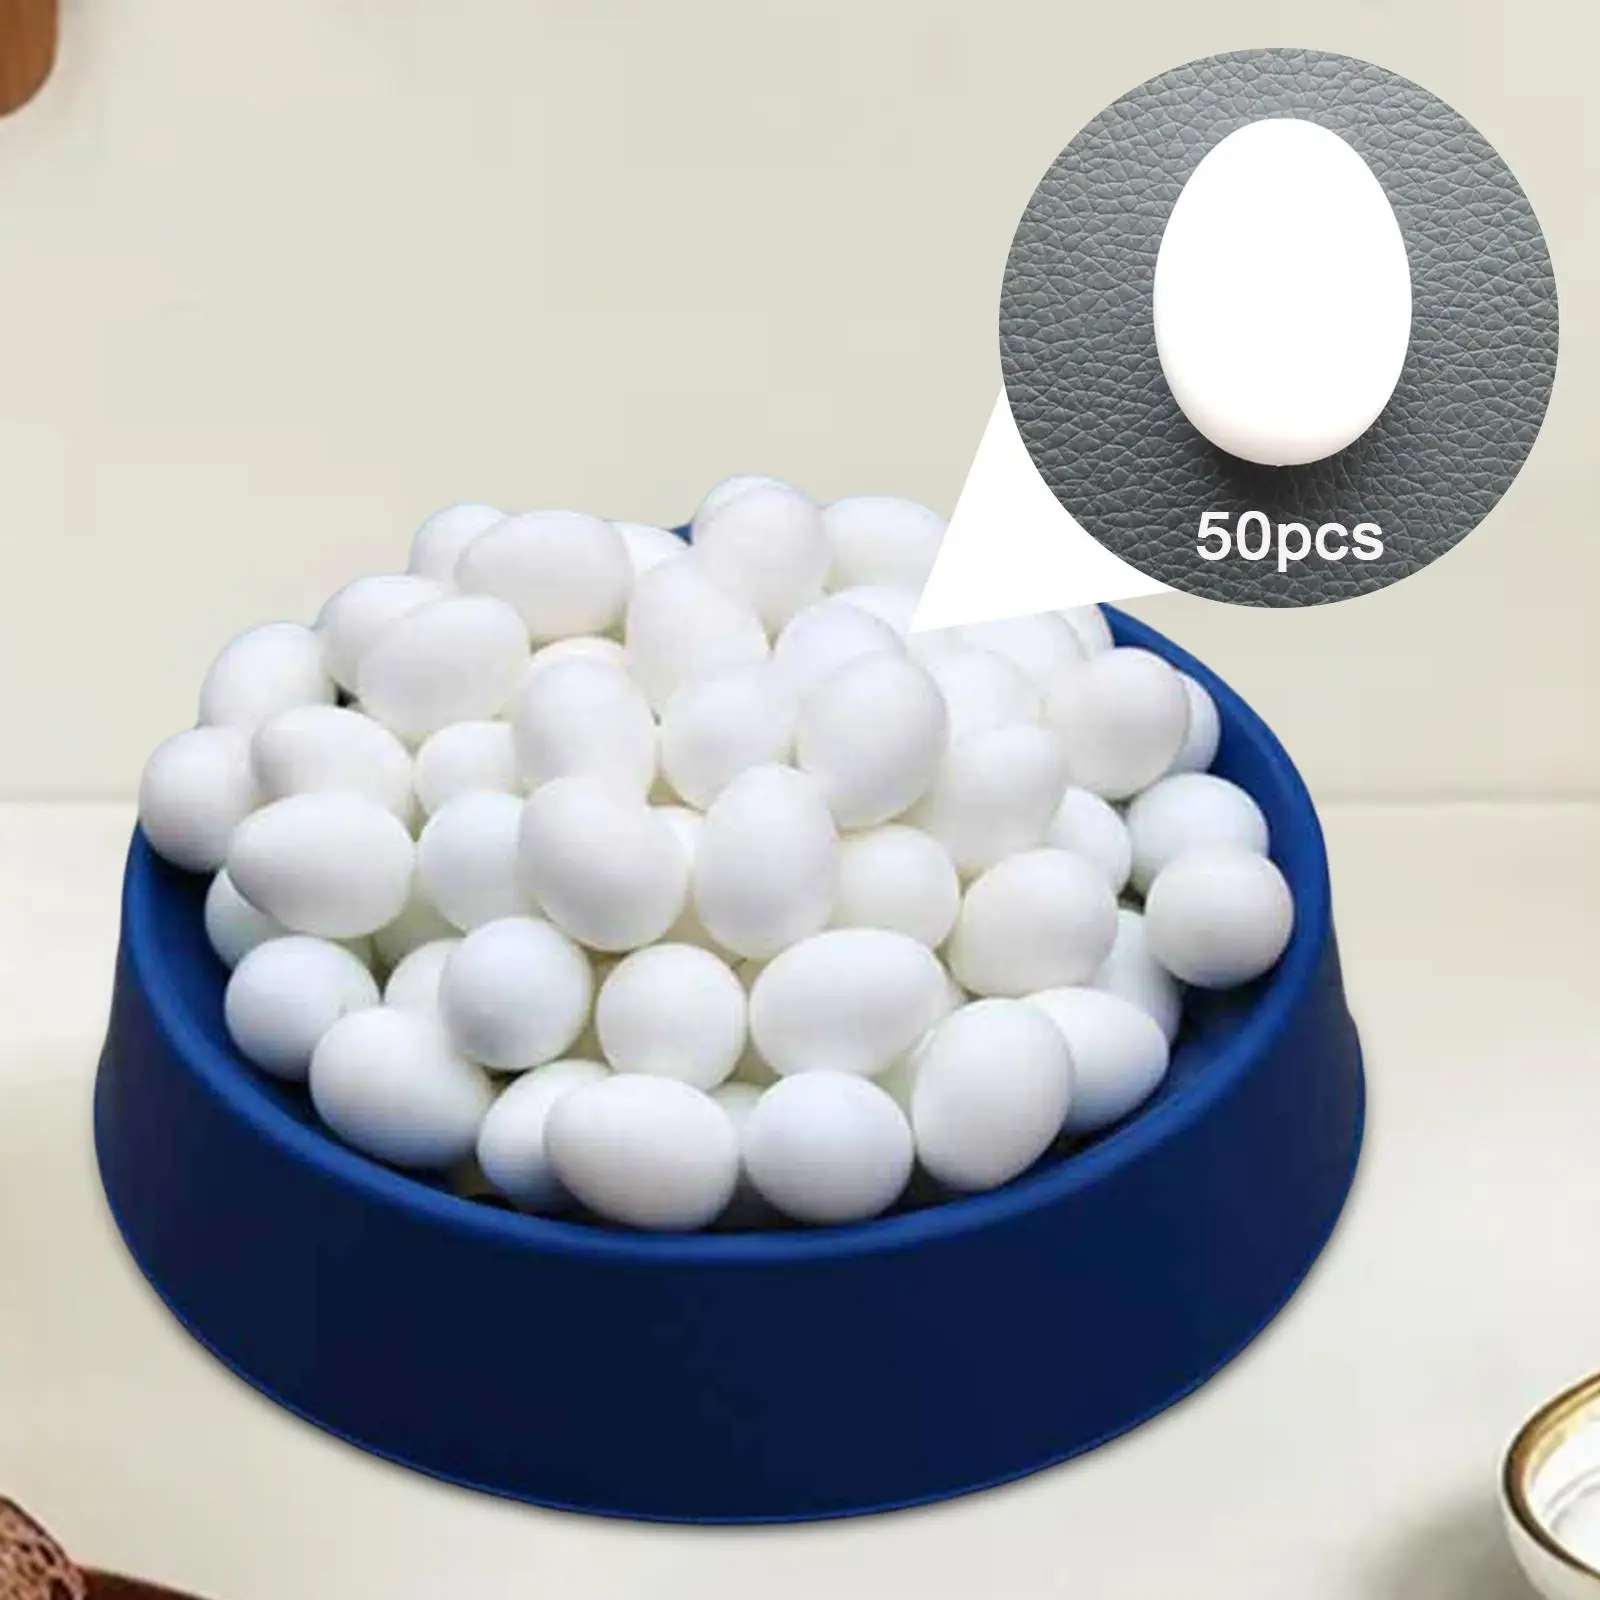 50x Plastic Pigeon Eggs Simulation Artificial Fake False Dummy Eggs for Hatching Supplies Racing Pigeons